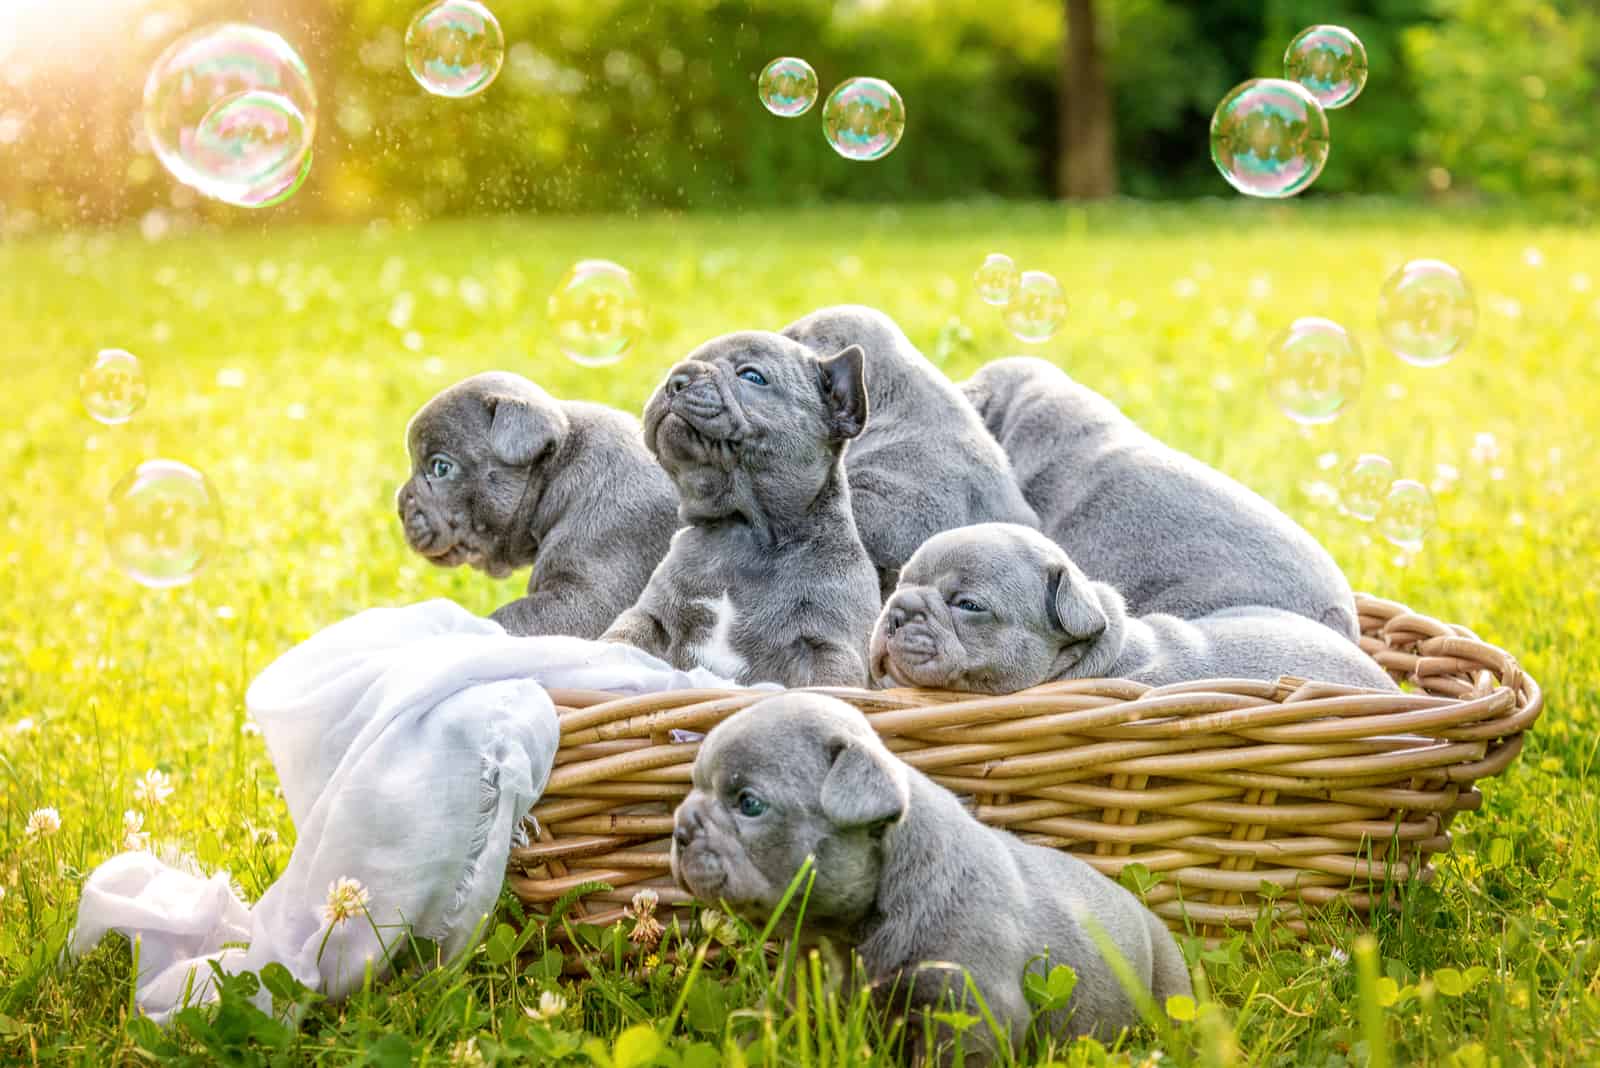 French Bulldog puppies in a basket